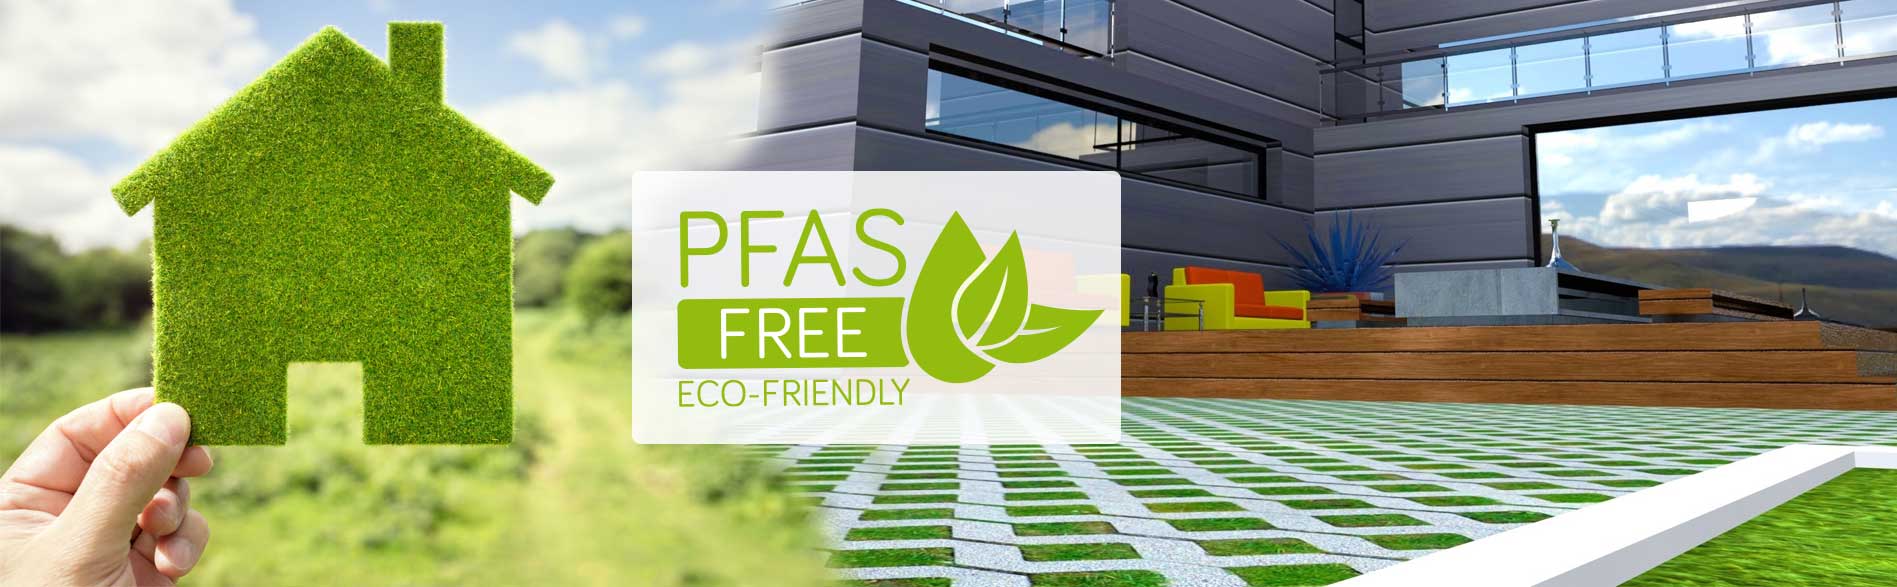 PFAS Free Synthetic Turf Made in USA